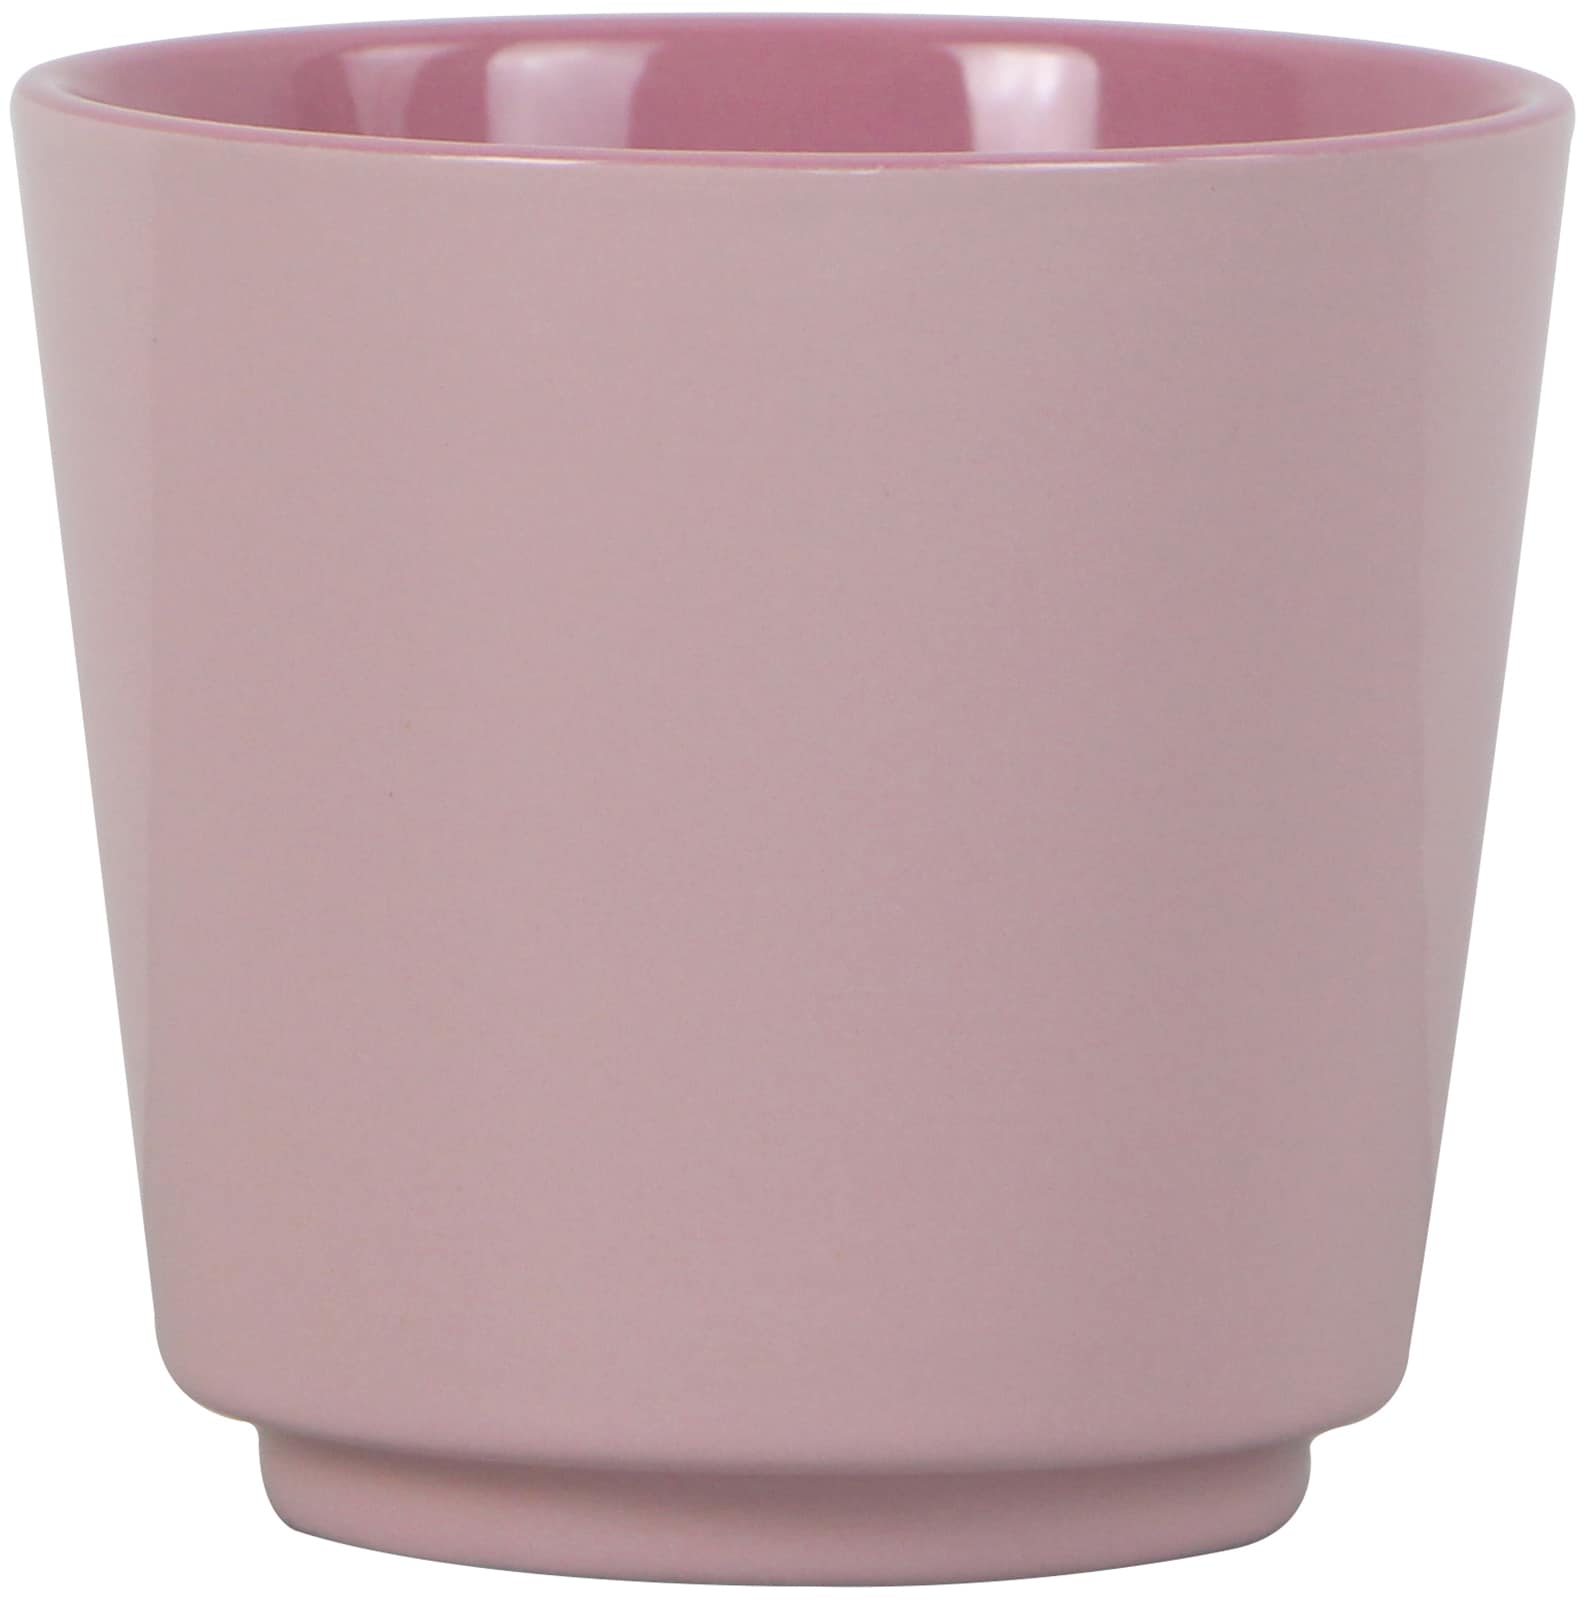 Ceramic allen department + Indoor H & x Pink in Planters at Pots roth W the 3.74-in 4.13-in Planter